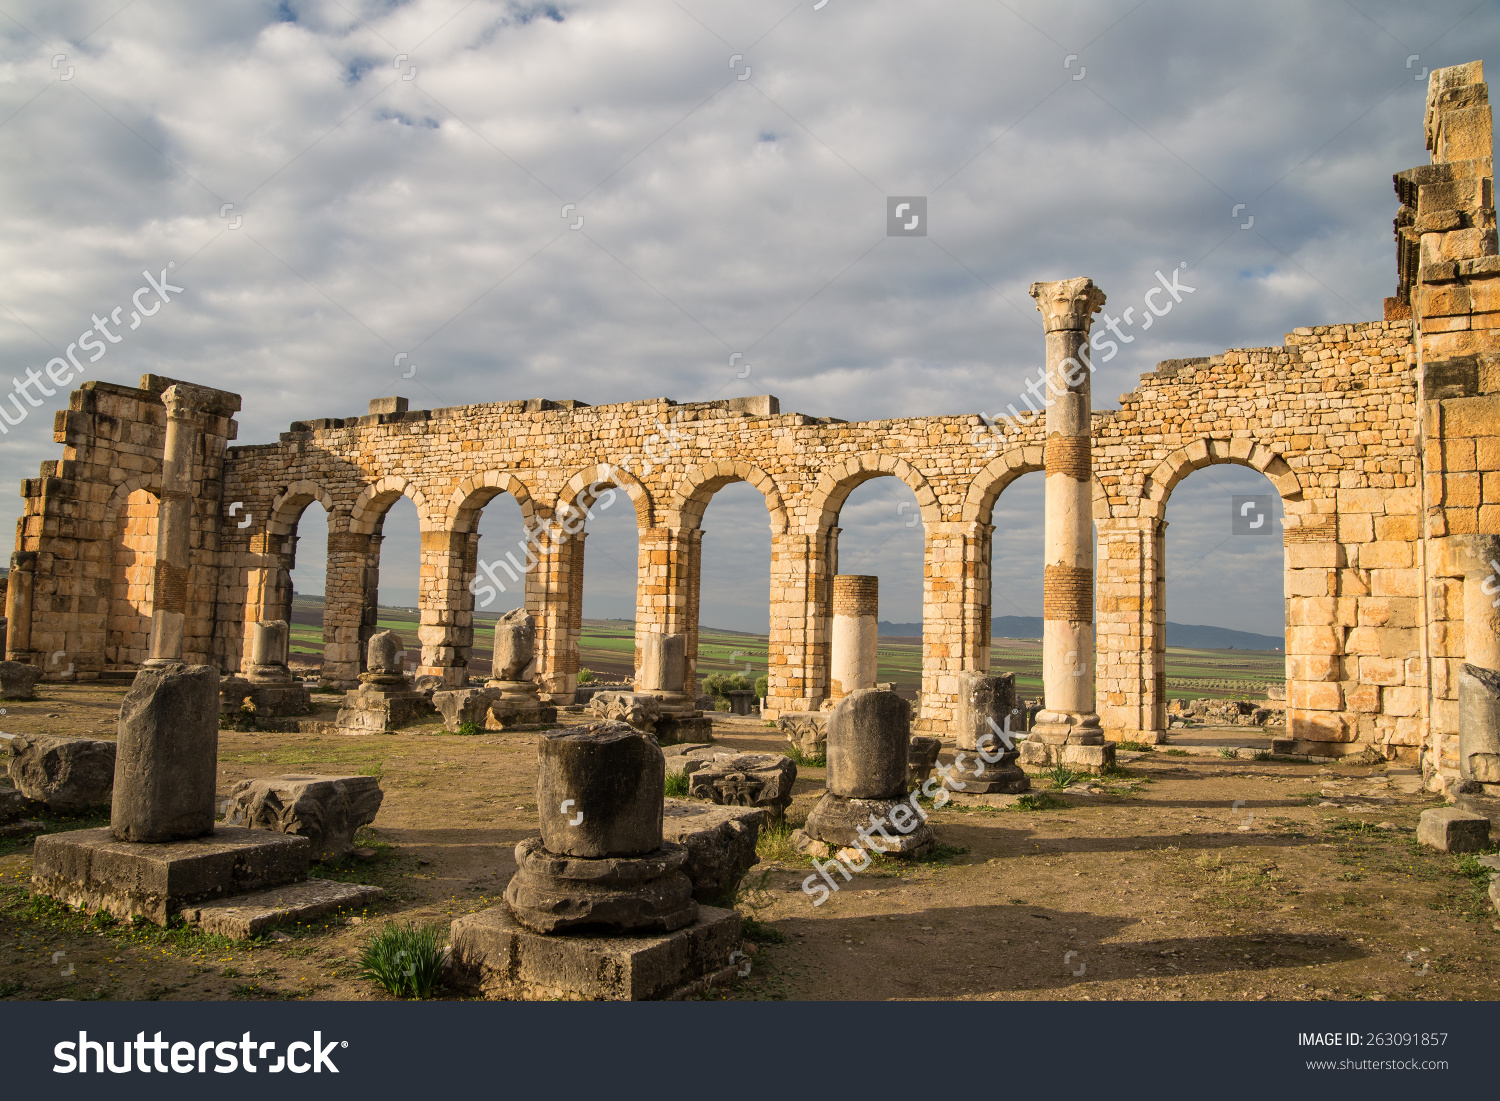 Ancient roman ruins in Morocco with white clouds and blue sky in the